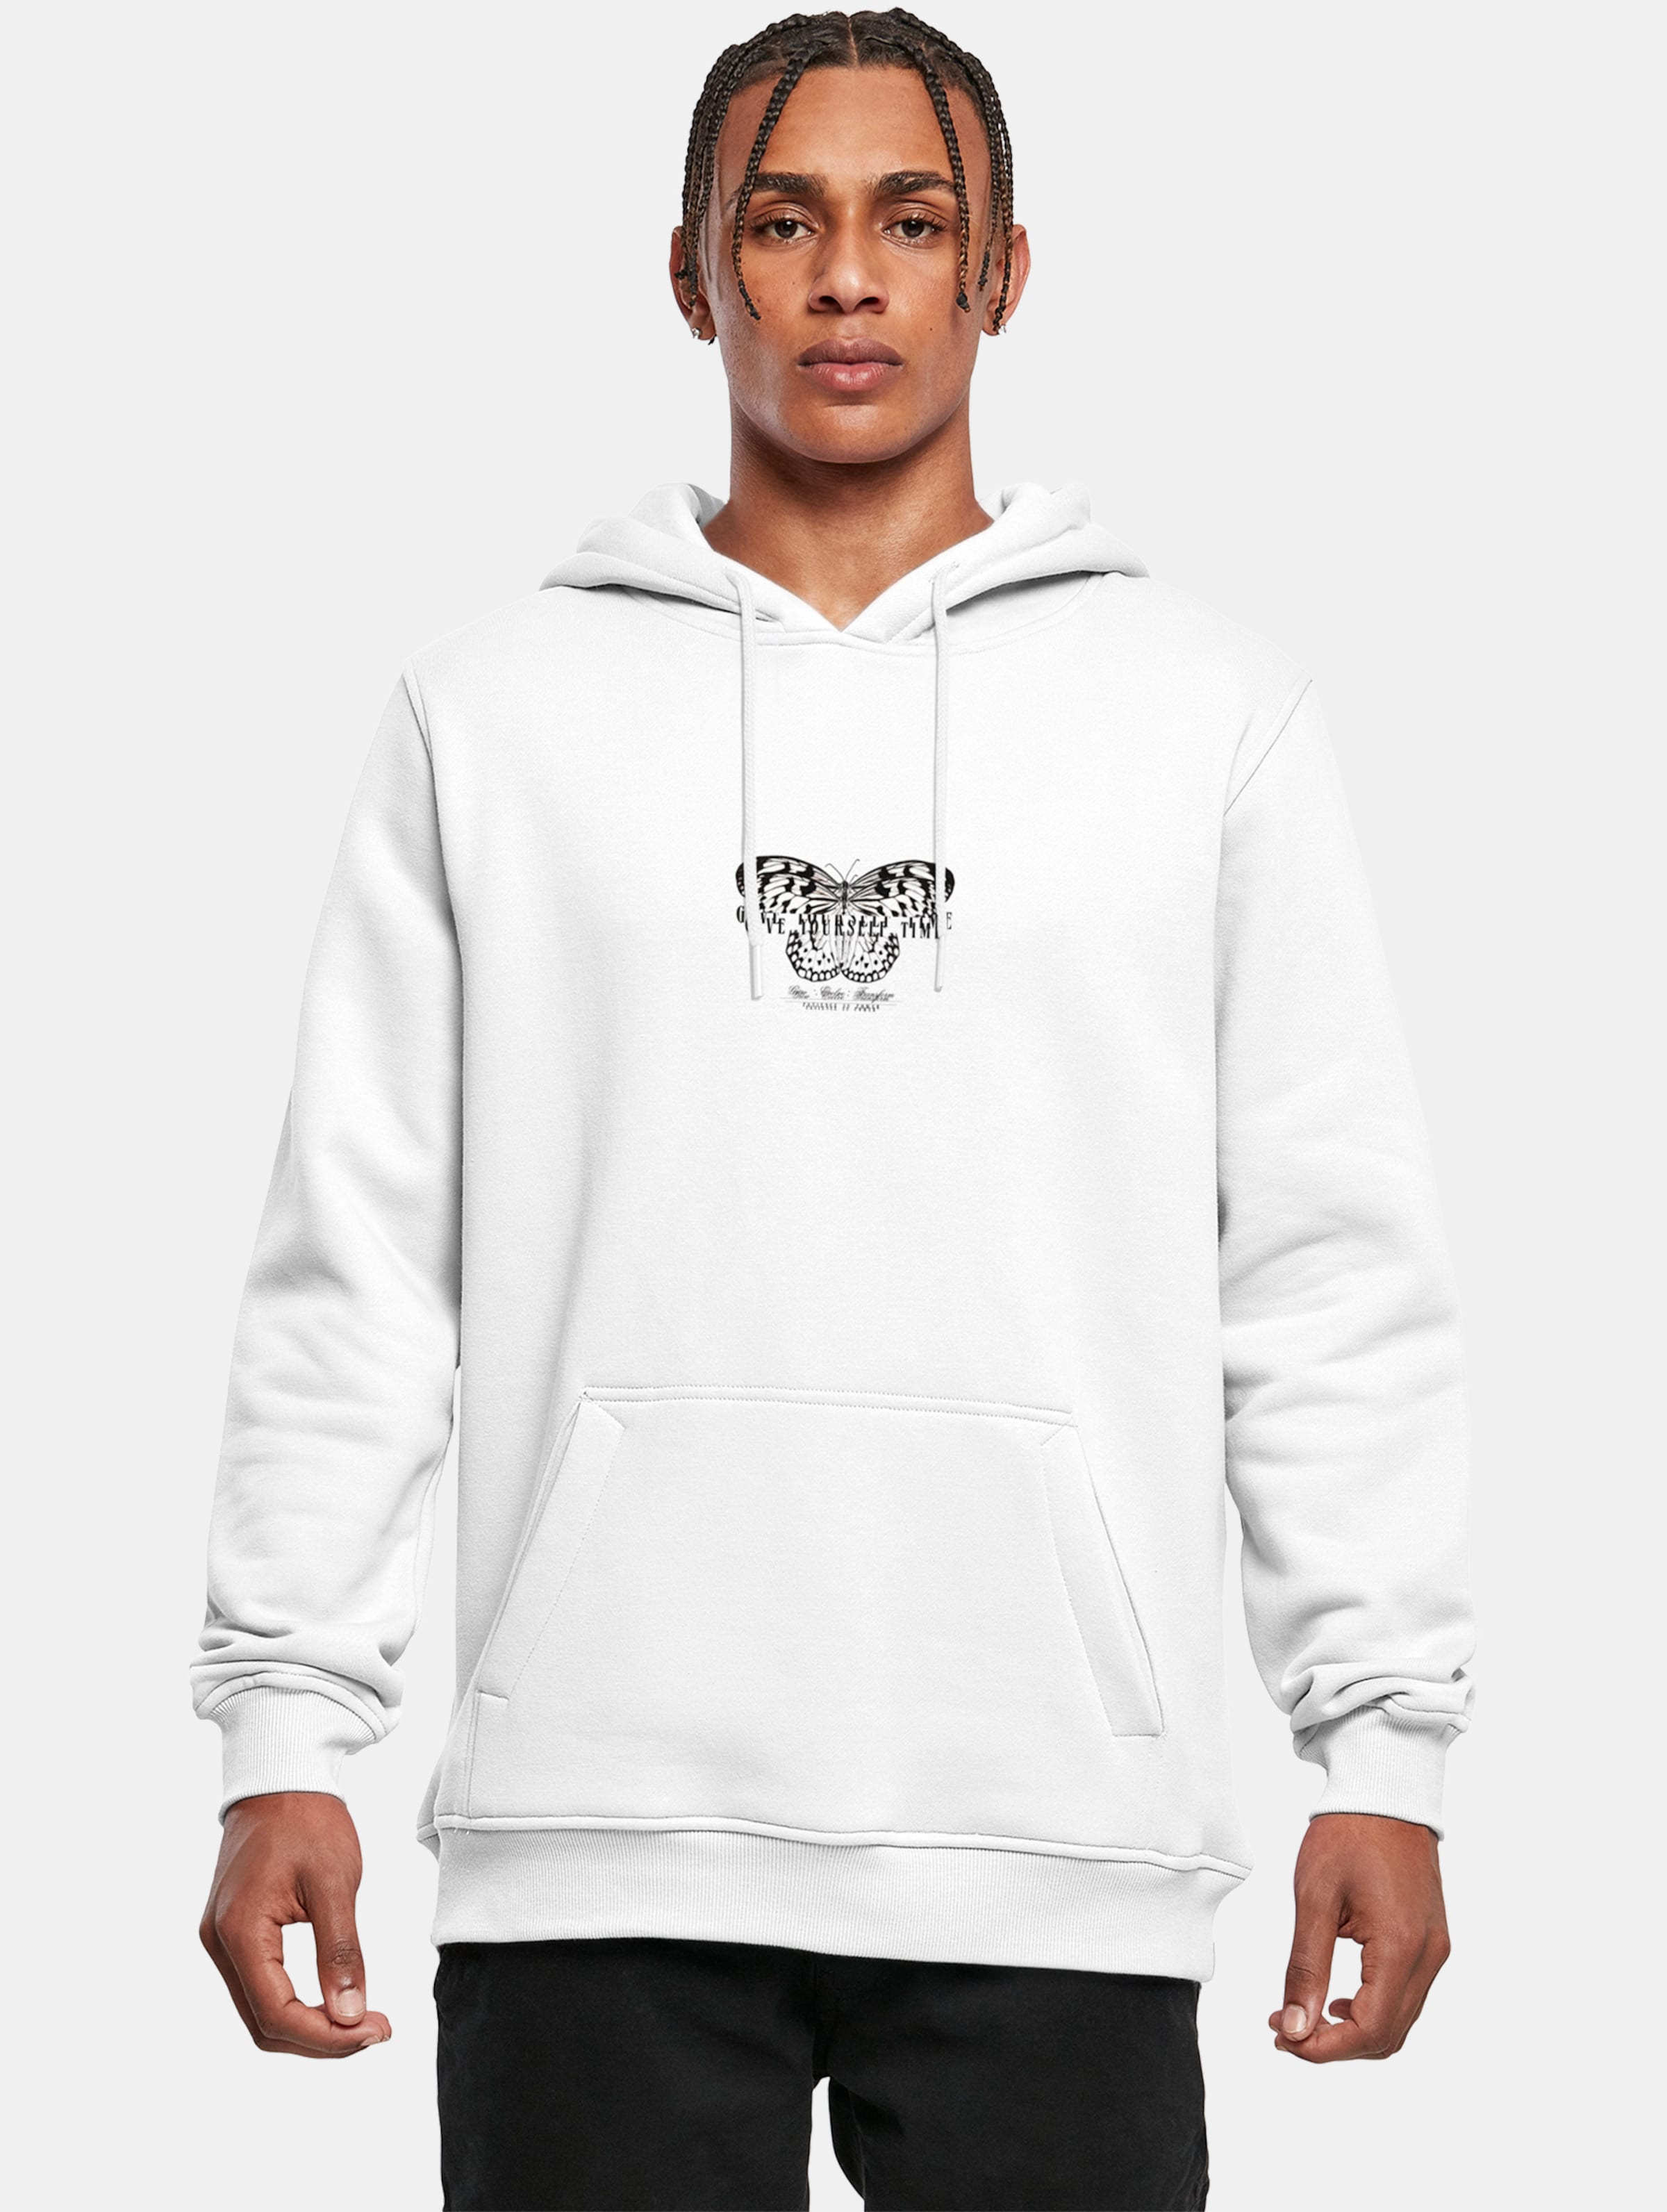 Mister Tee - Give Yourself Time Hoodie/trui - M - Wit